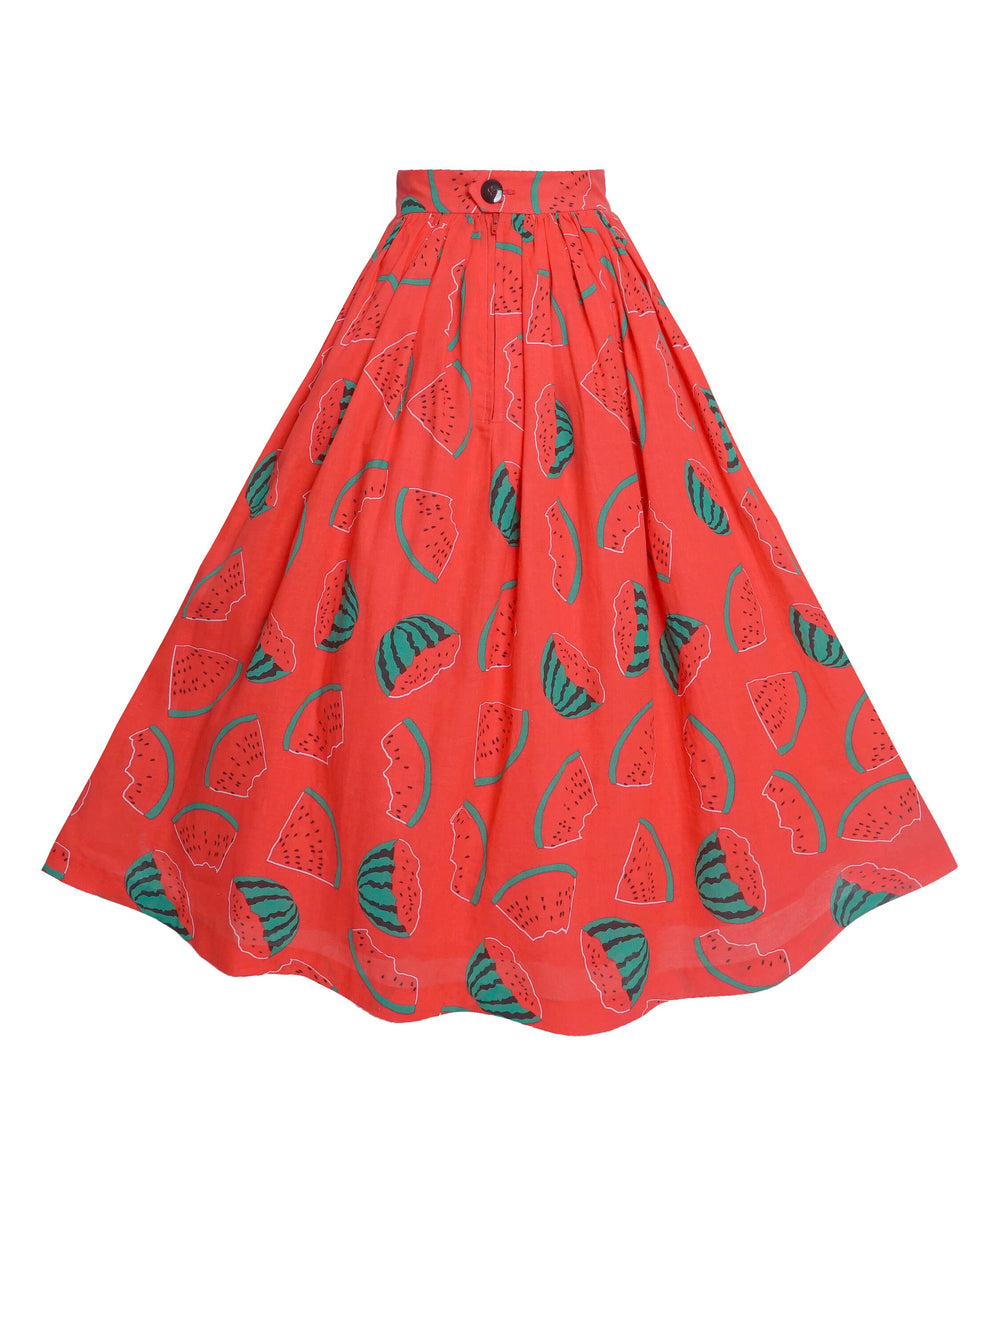 RTS - Size S - Lola Skirt Red "Feeling a Bit Meloncholy"